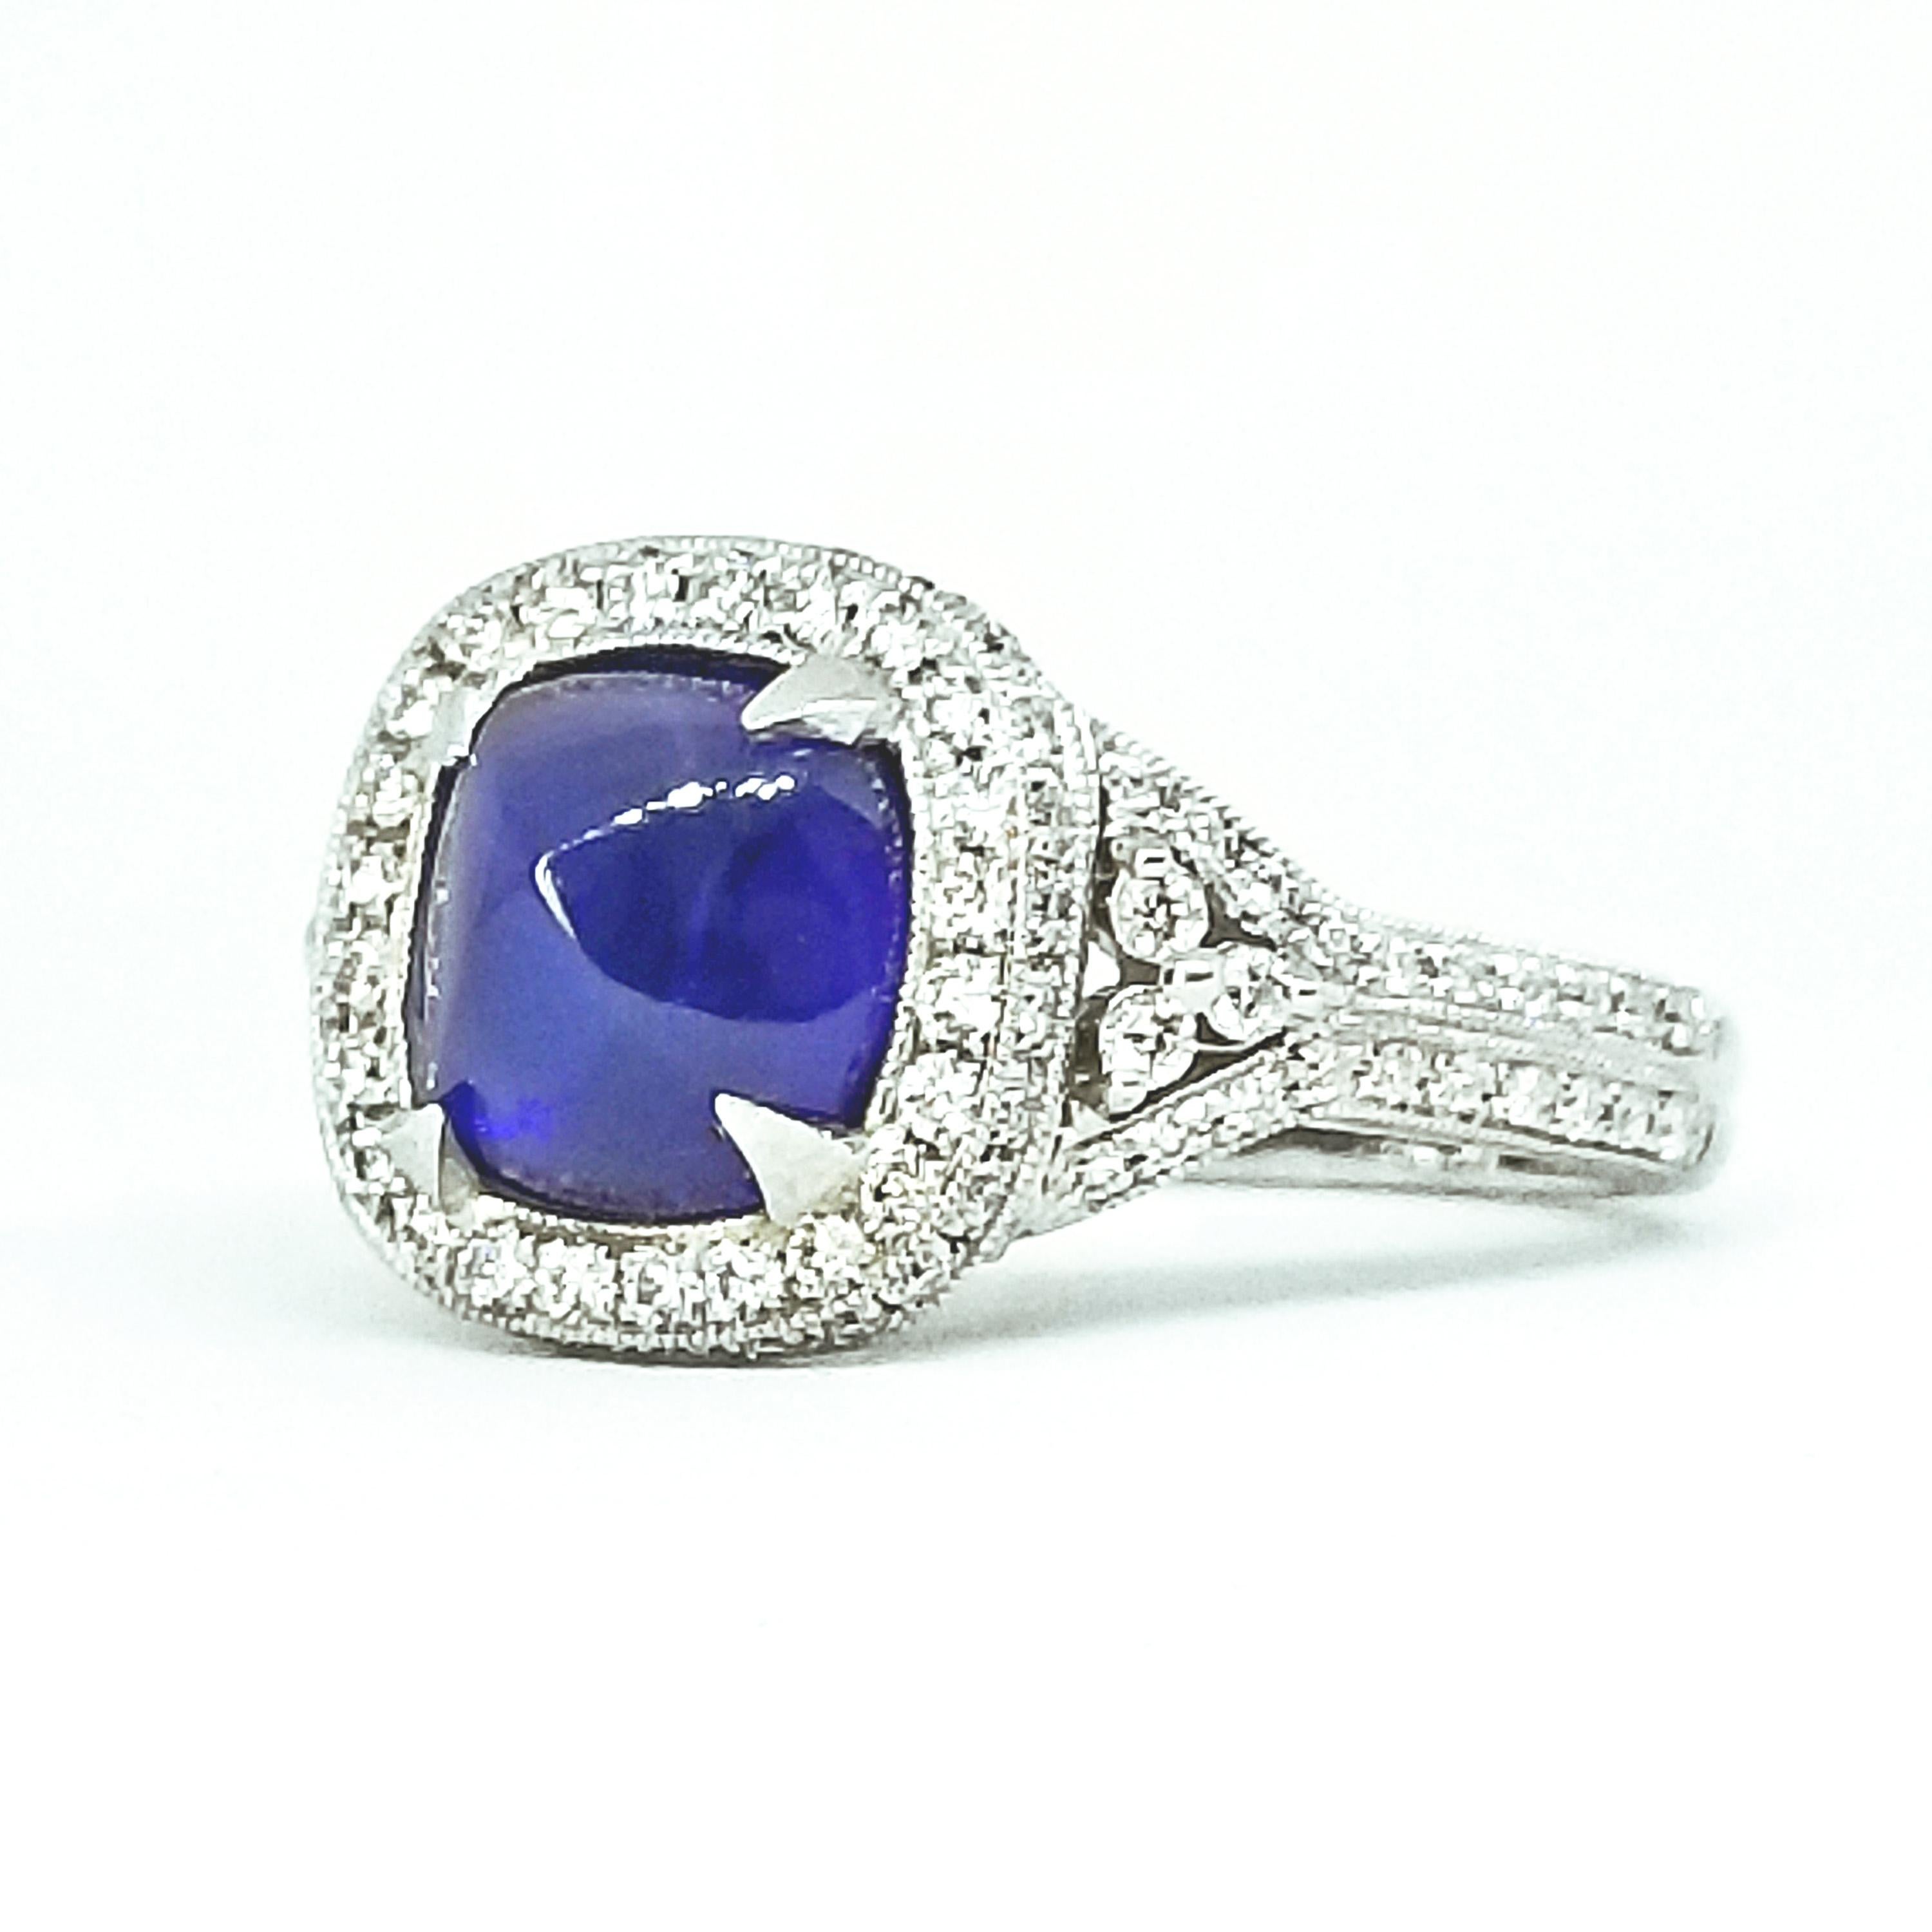 4.05 Carat Blue Sugarloaf Cushion Sapphire Diamond Deco Style Ring White Gold For Sale 2